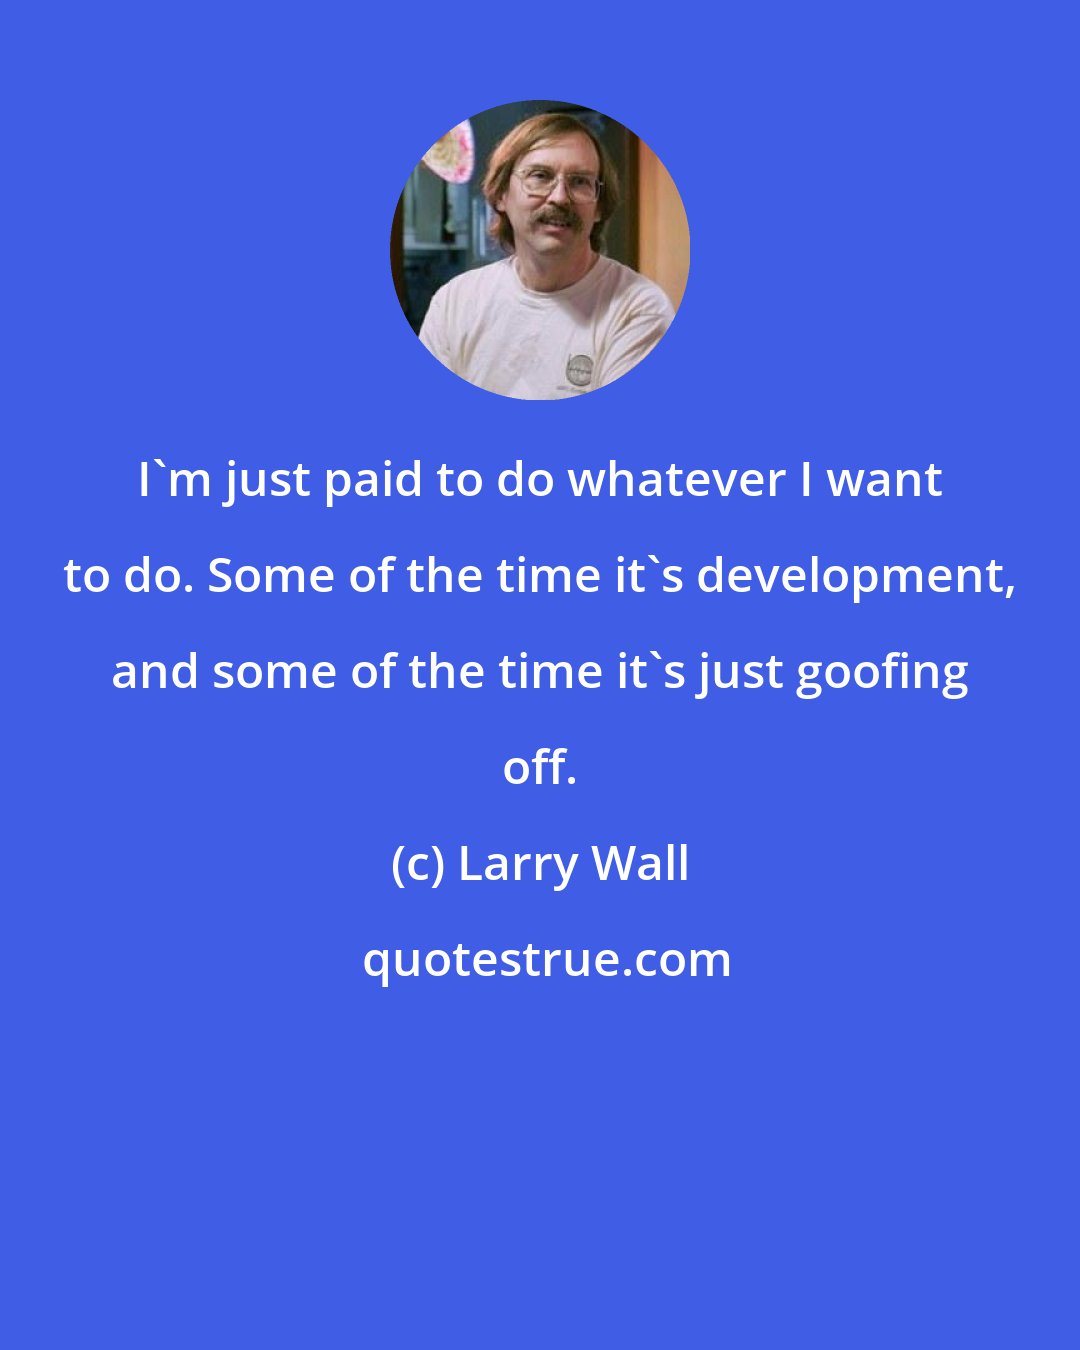 Larry Wall: I'm just paid to do whatever I want to do. Some of the time it's development, and some of the time it's just goofing off.